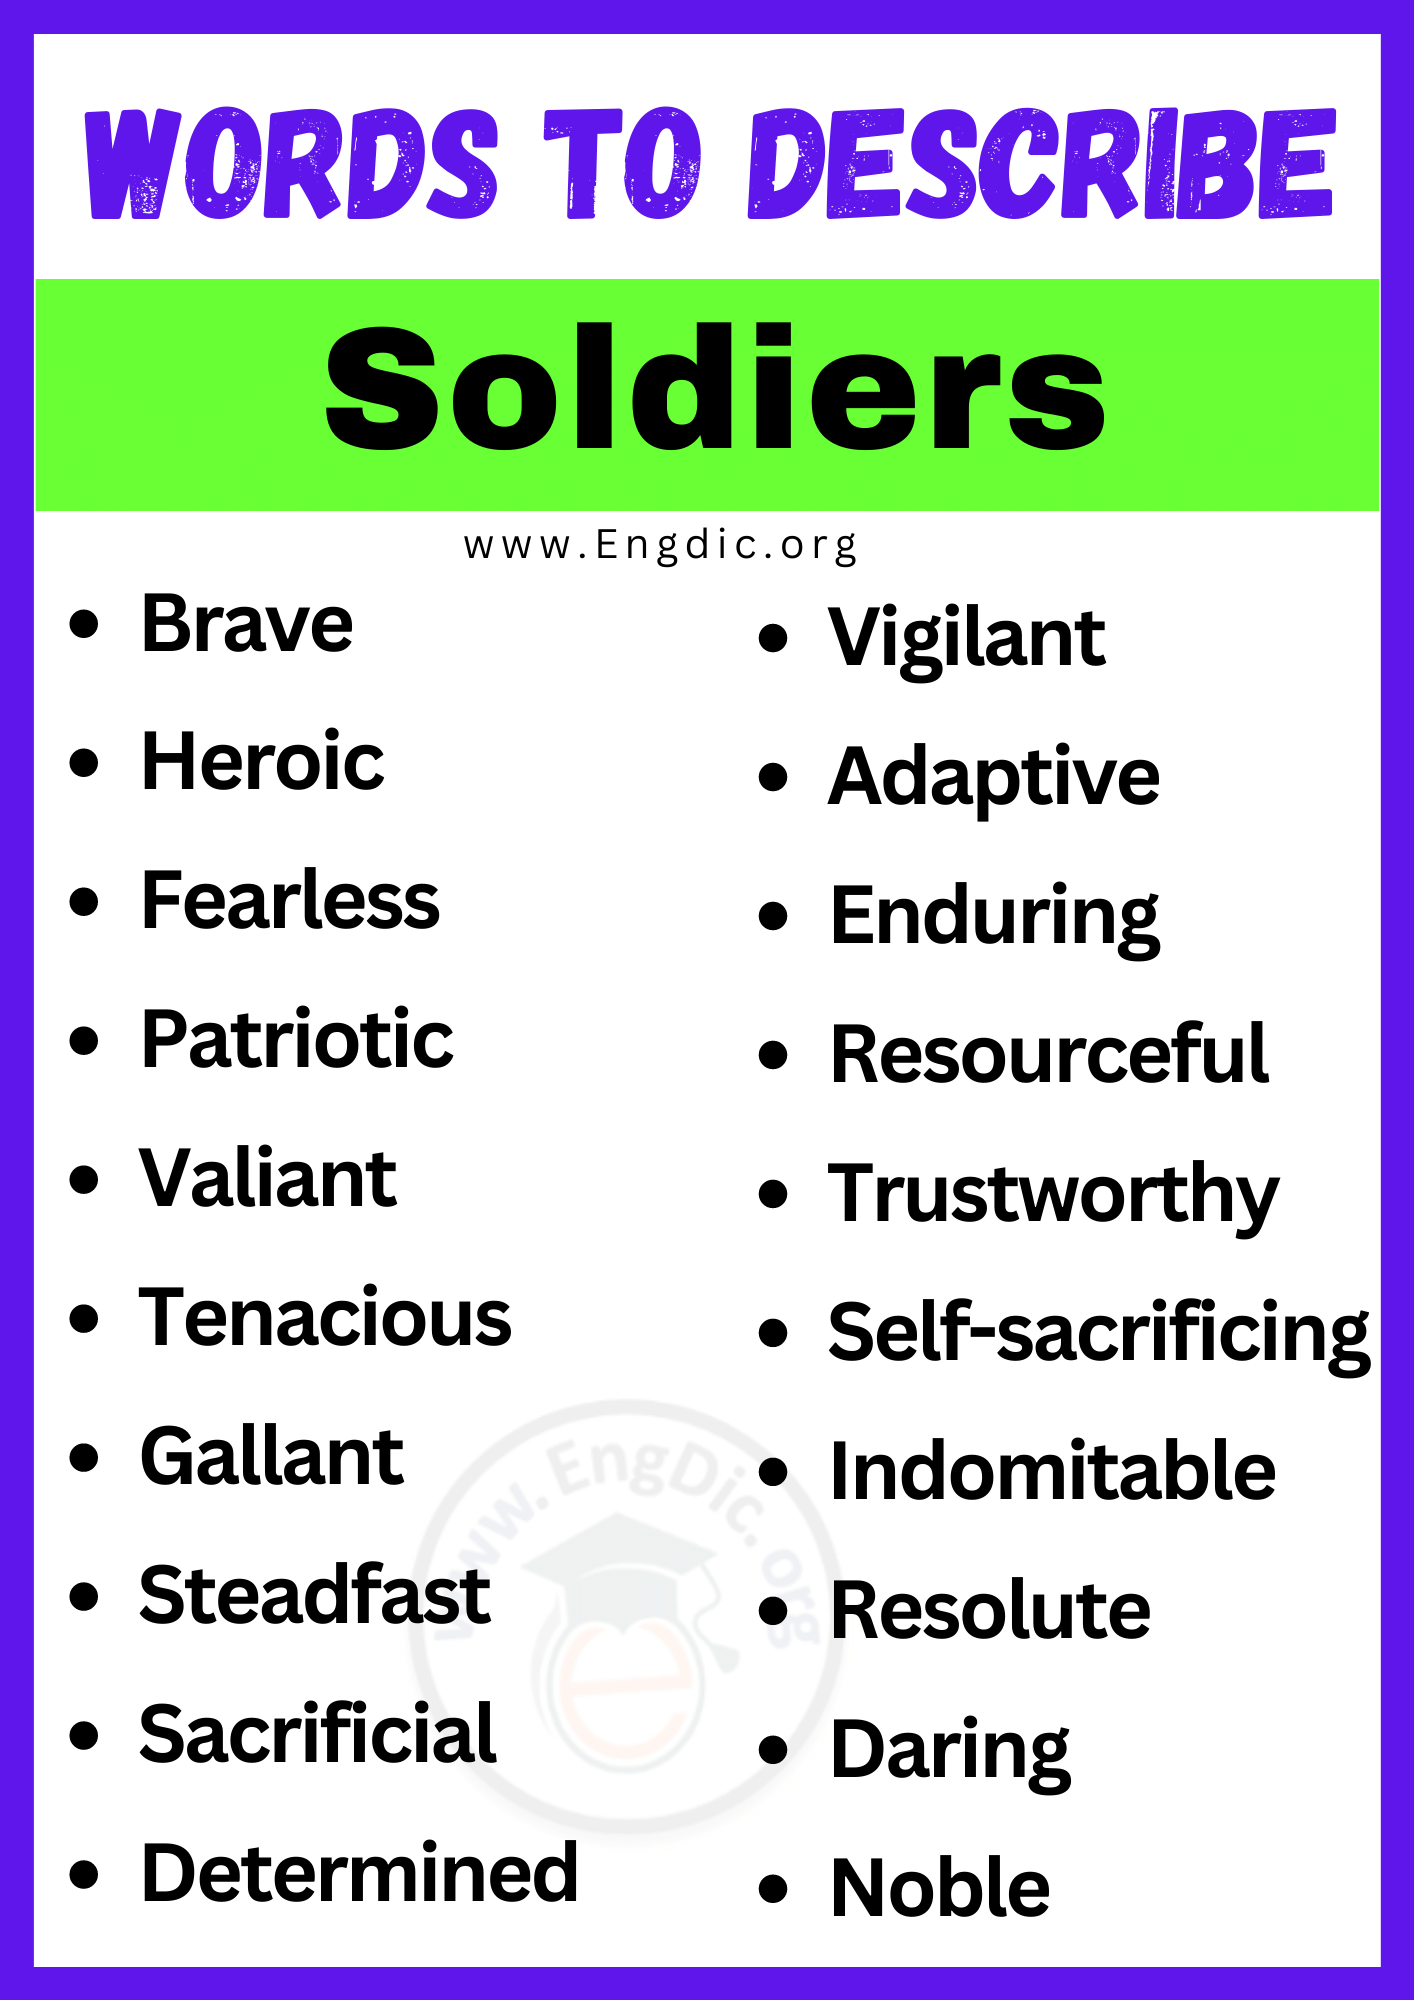 Words to Describe Soldiers